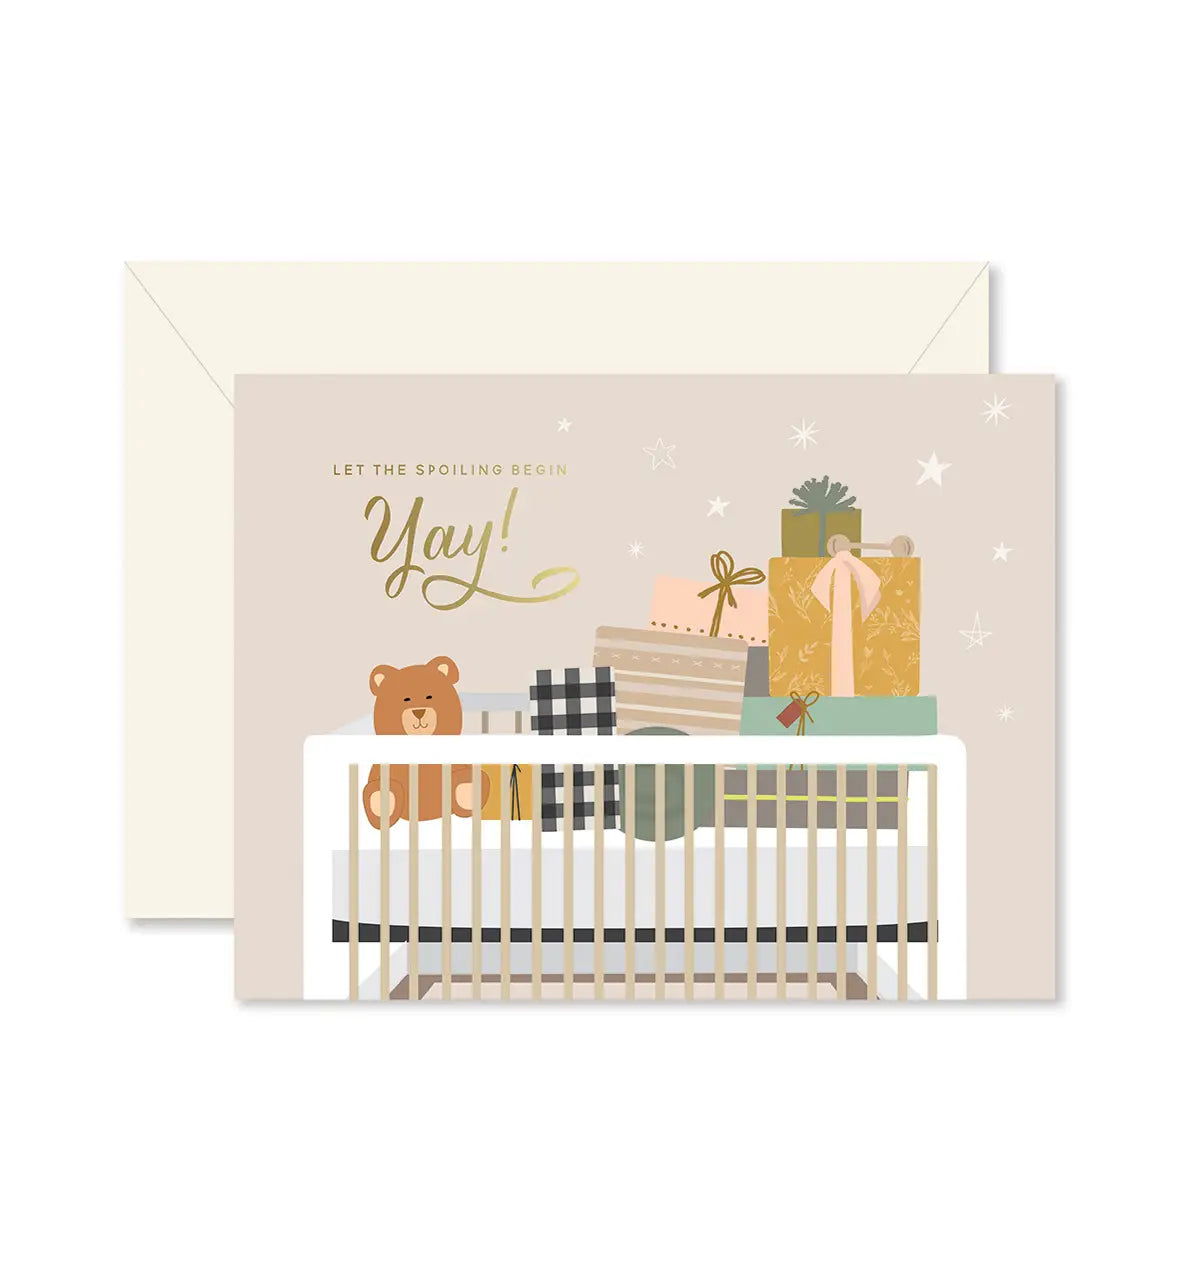 Spoiling Baby Card